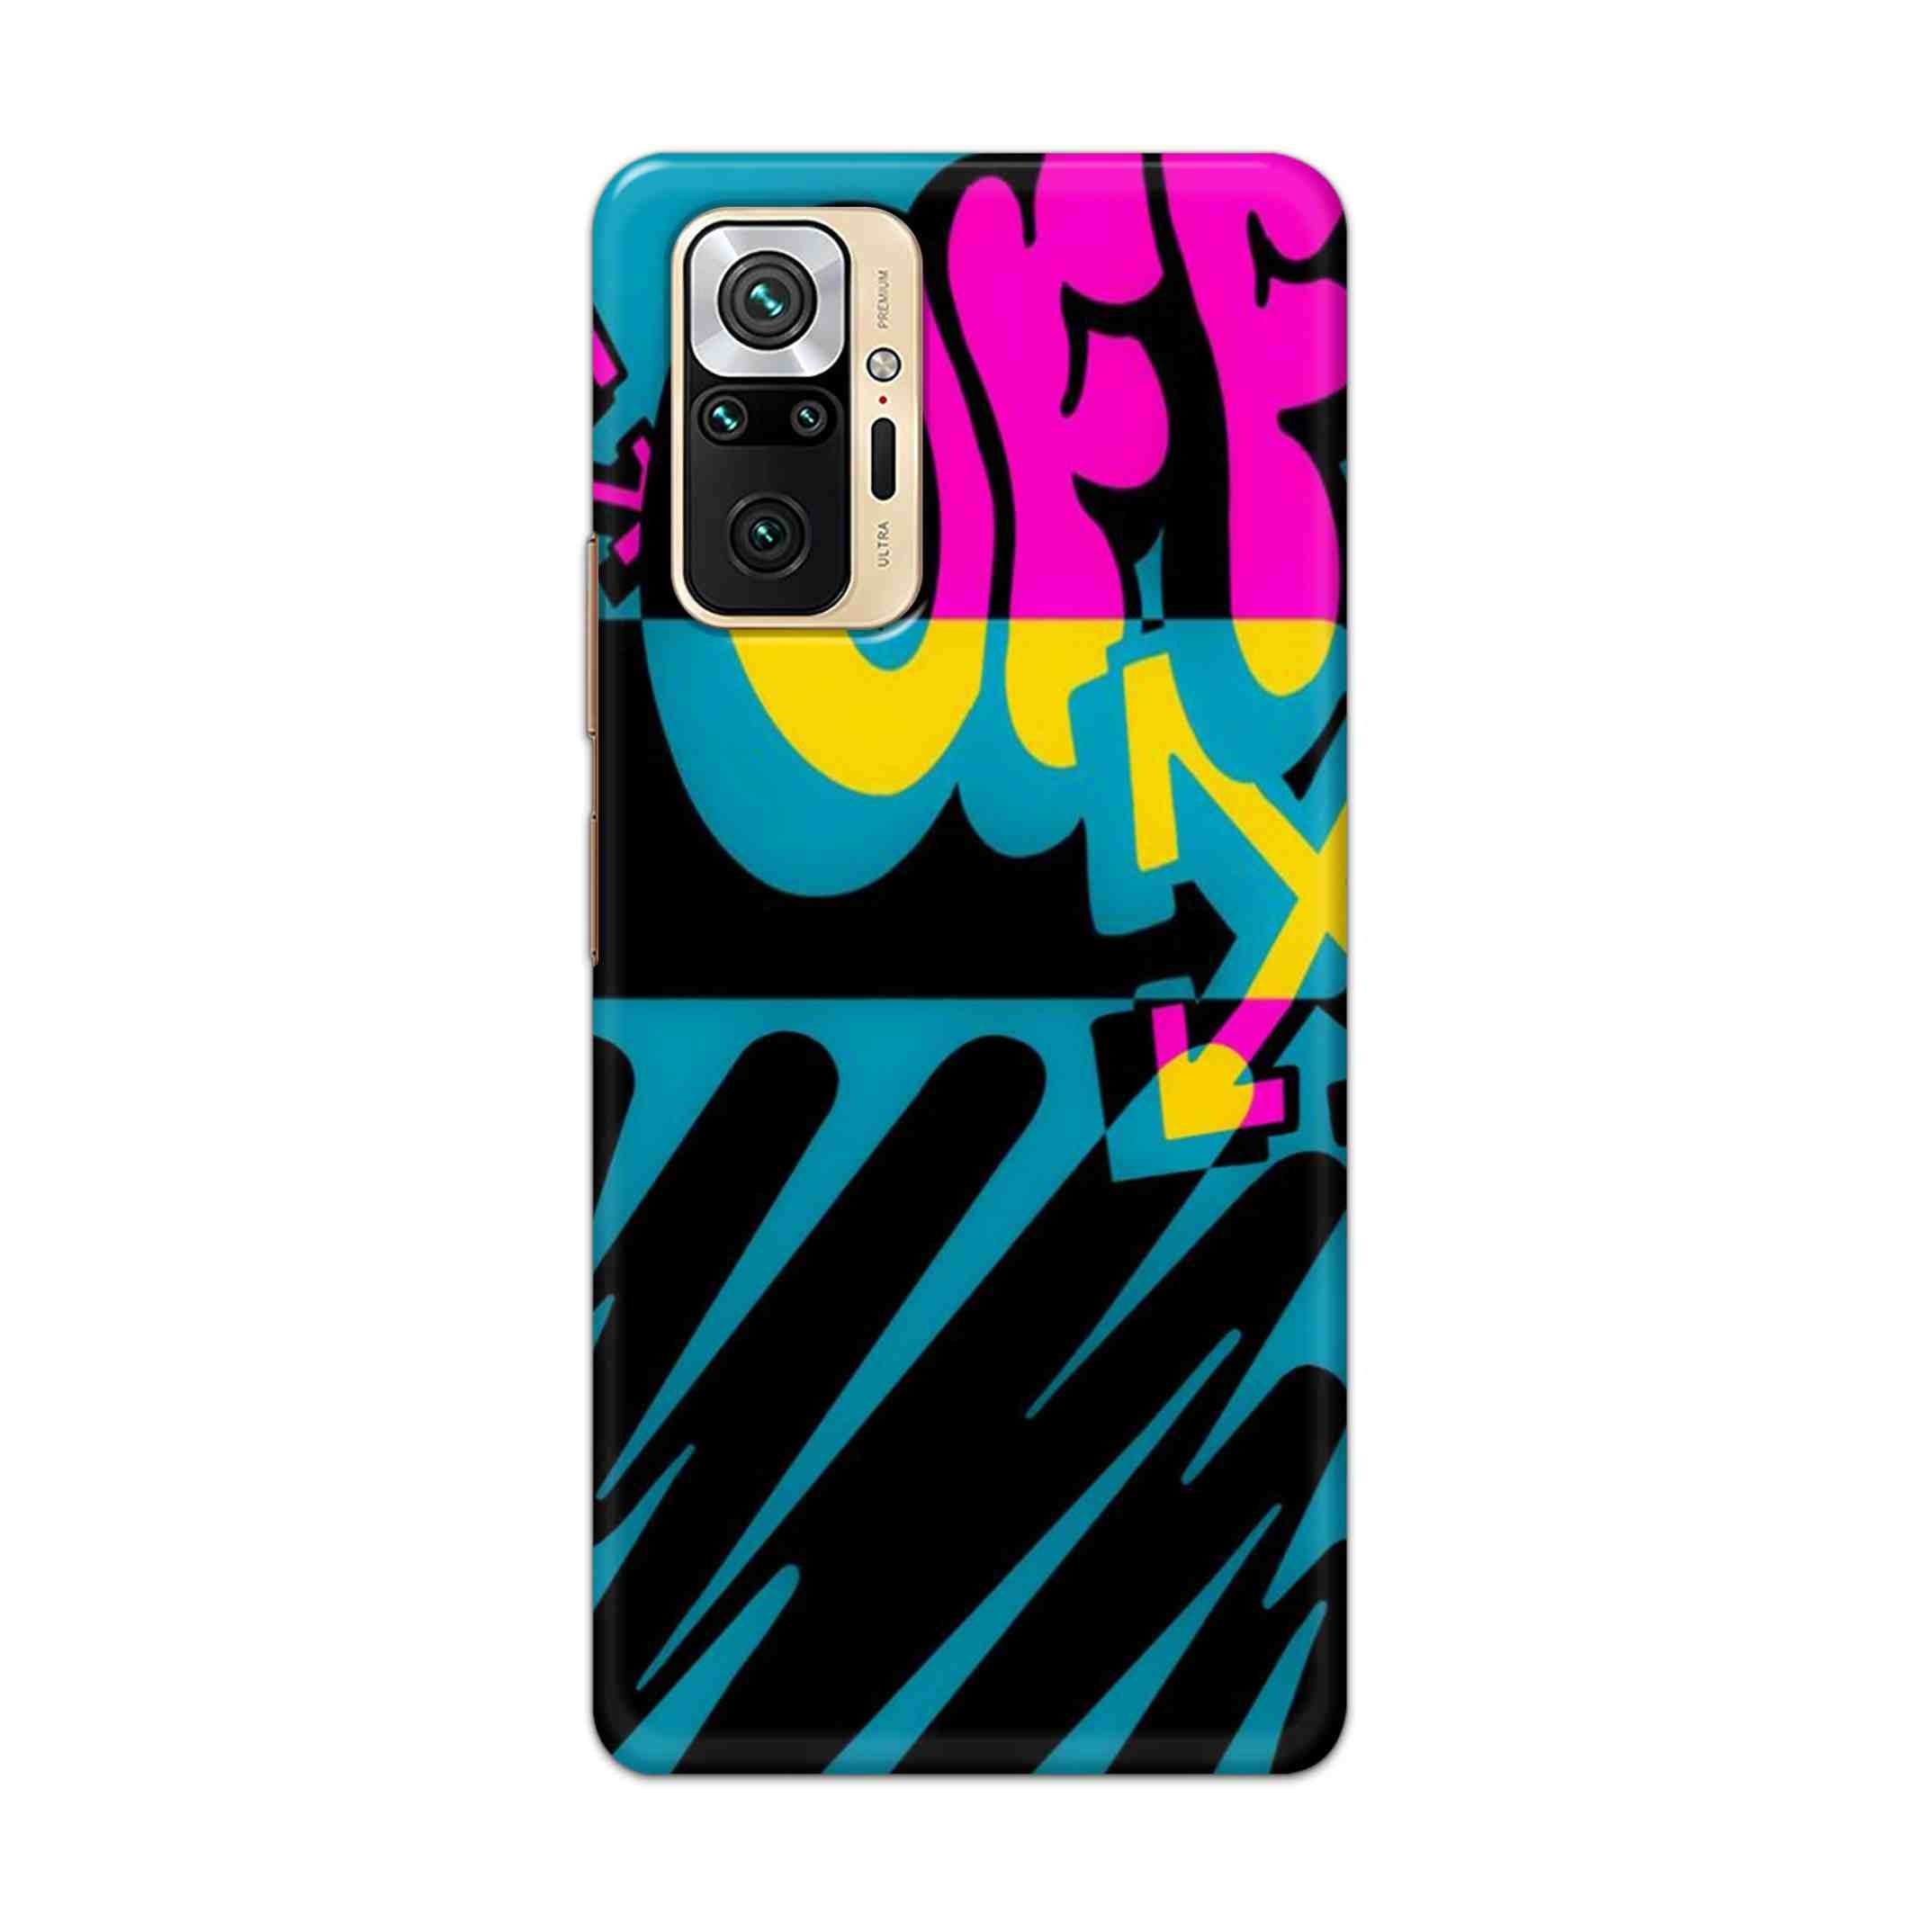 Buy Off Hard Back Mobile Phone Case Cover For Redmi Note 10 Pro Max Online